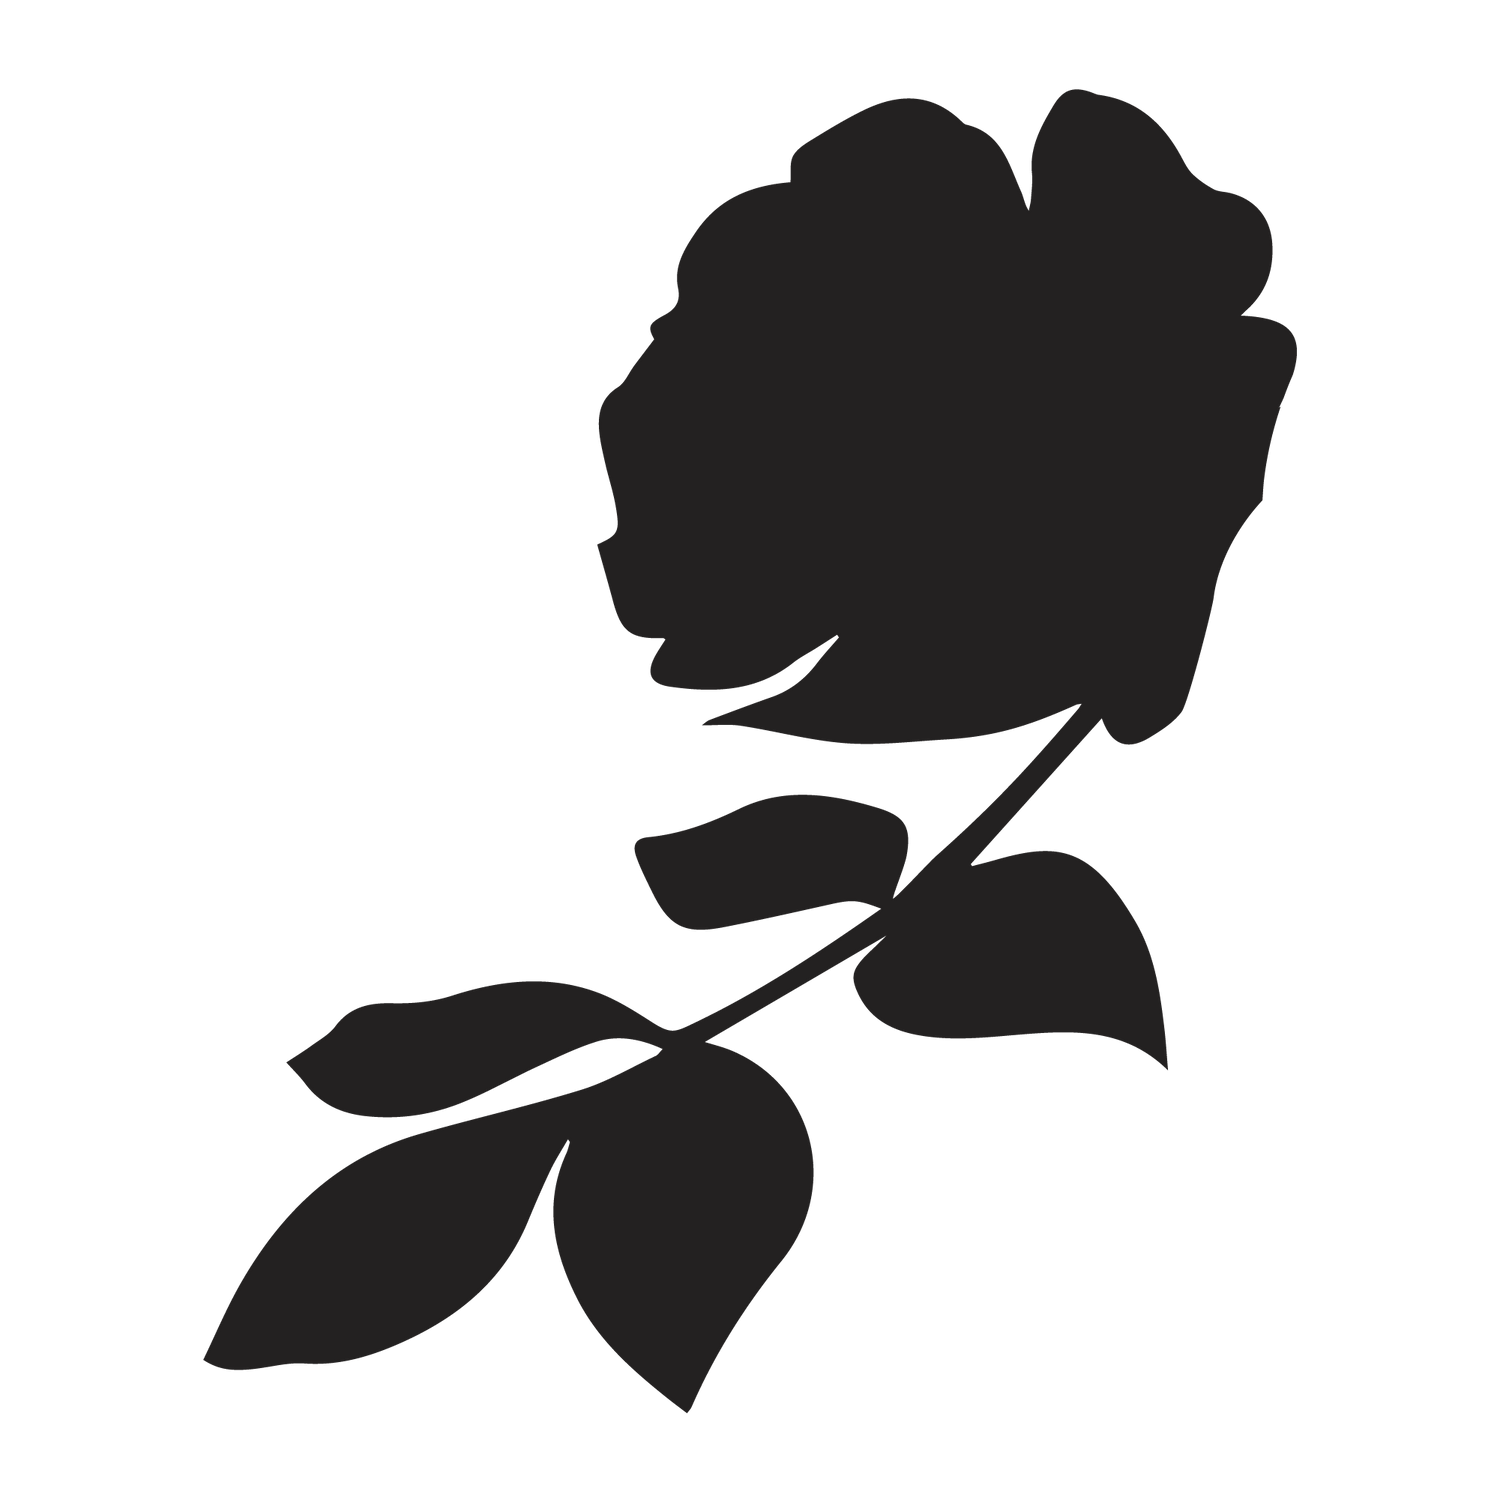 Thistle and Wren square rose logo